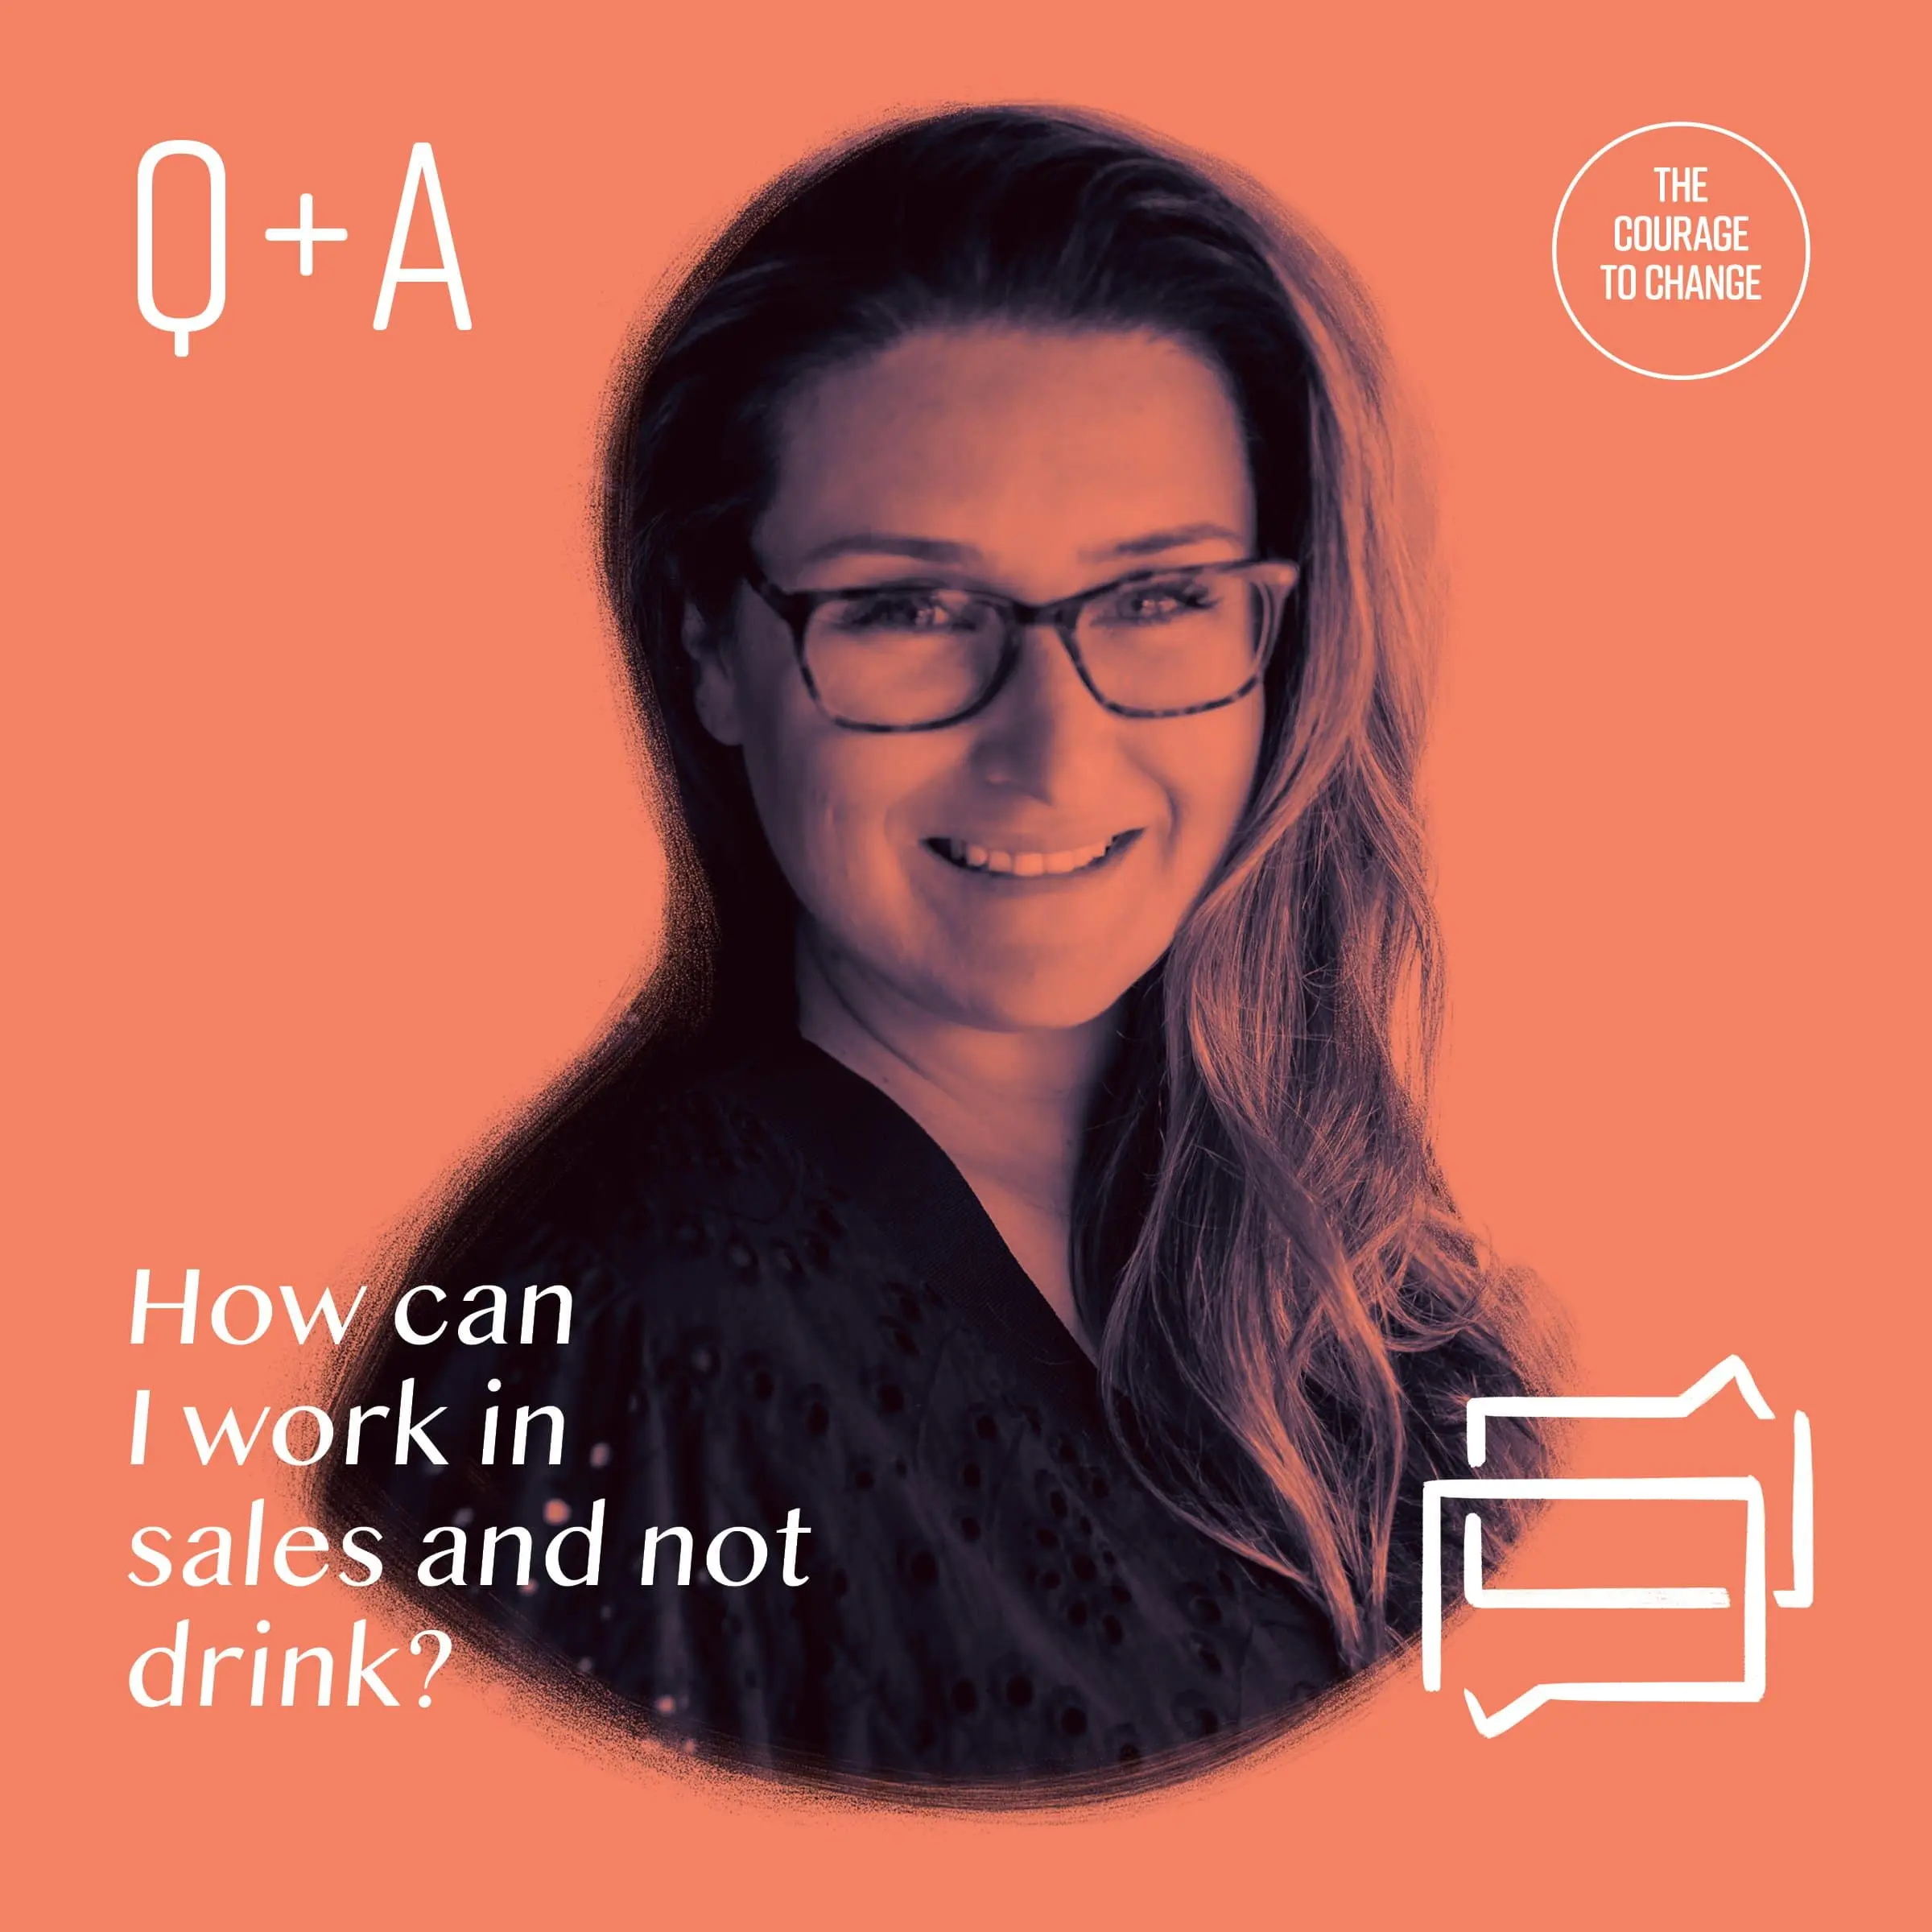 Q+A How Can I Work In Sales And Not Drink?